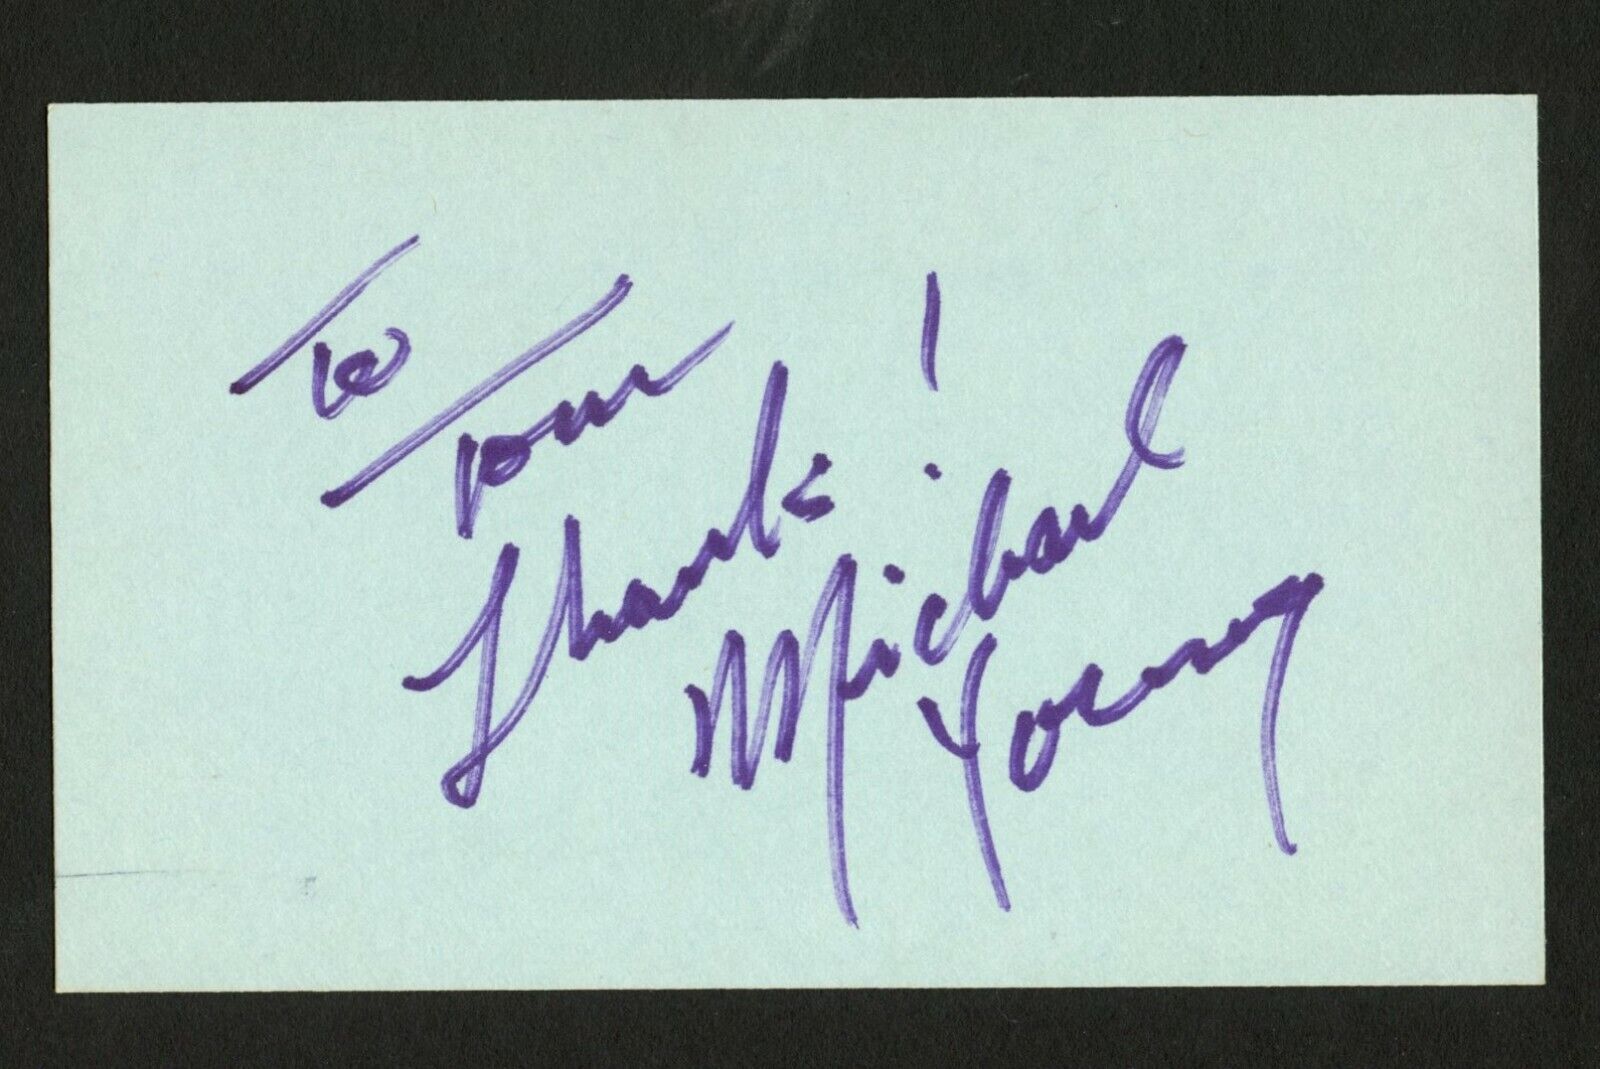 Michael Young signed autograph auto 3x5 index card Actor & Television host C799